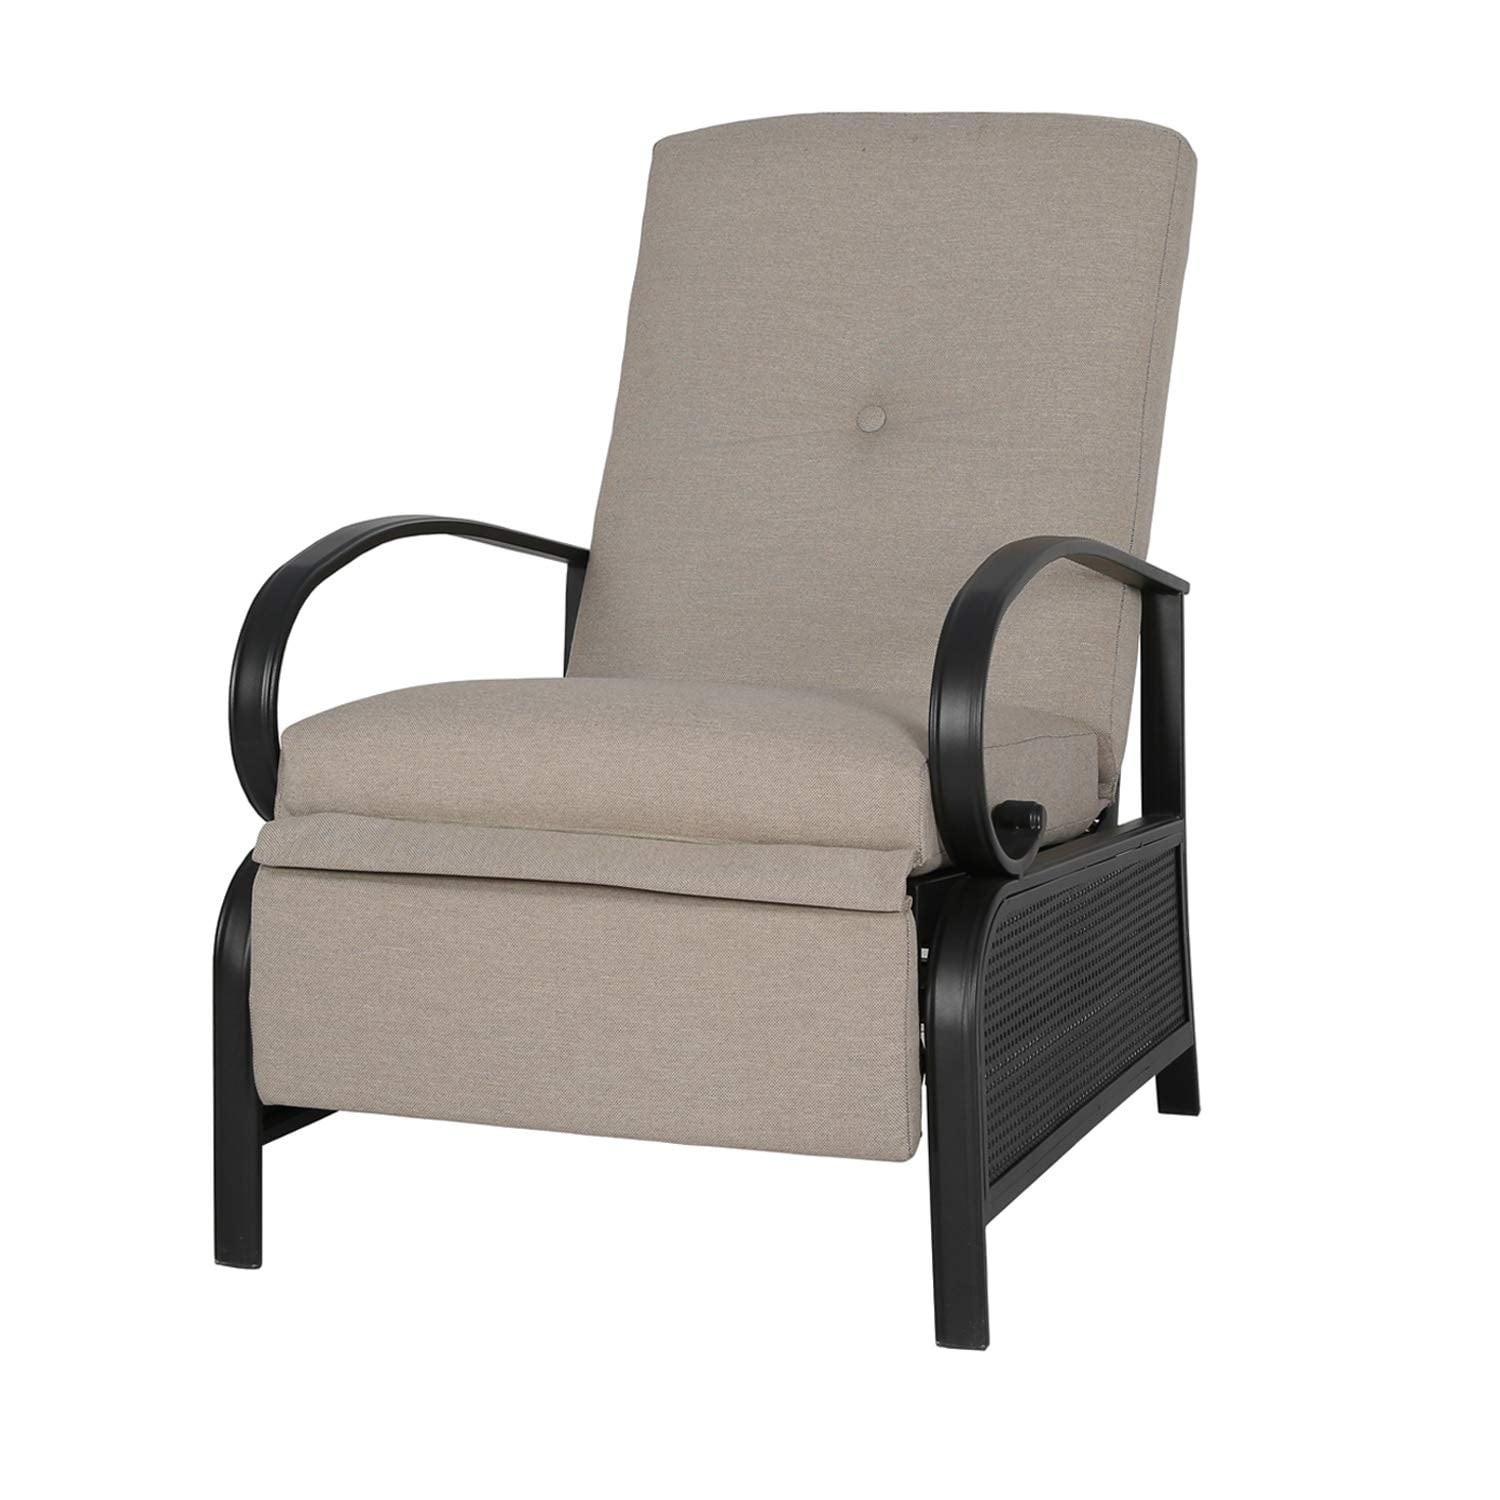 Ulax furniture Patio Recliner Chair Automatic Adjustable Back Outdoor Lounge Chair with 100% Olefin Cushion, Sailcloth Beige